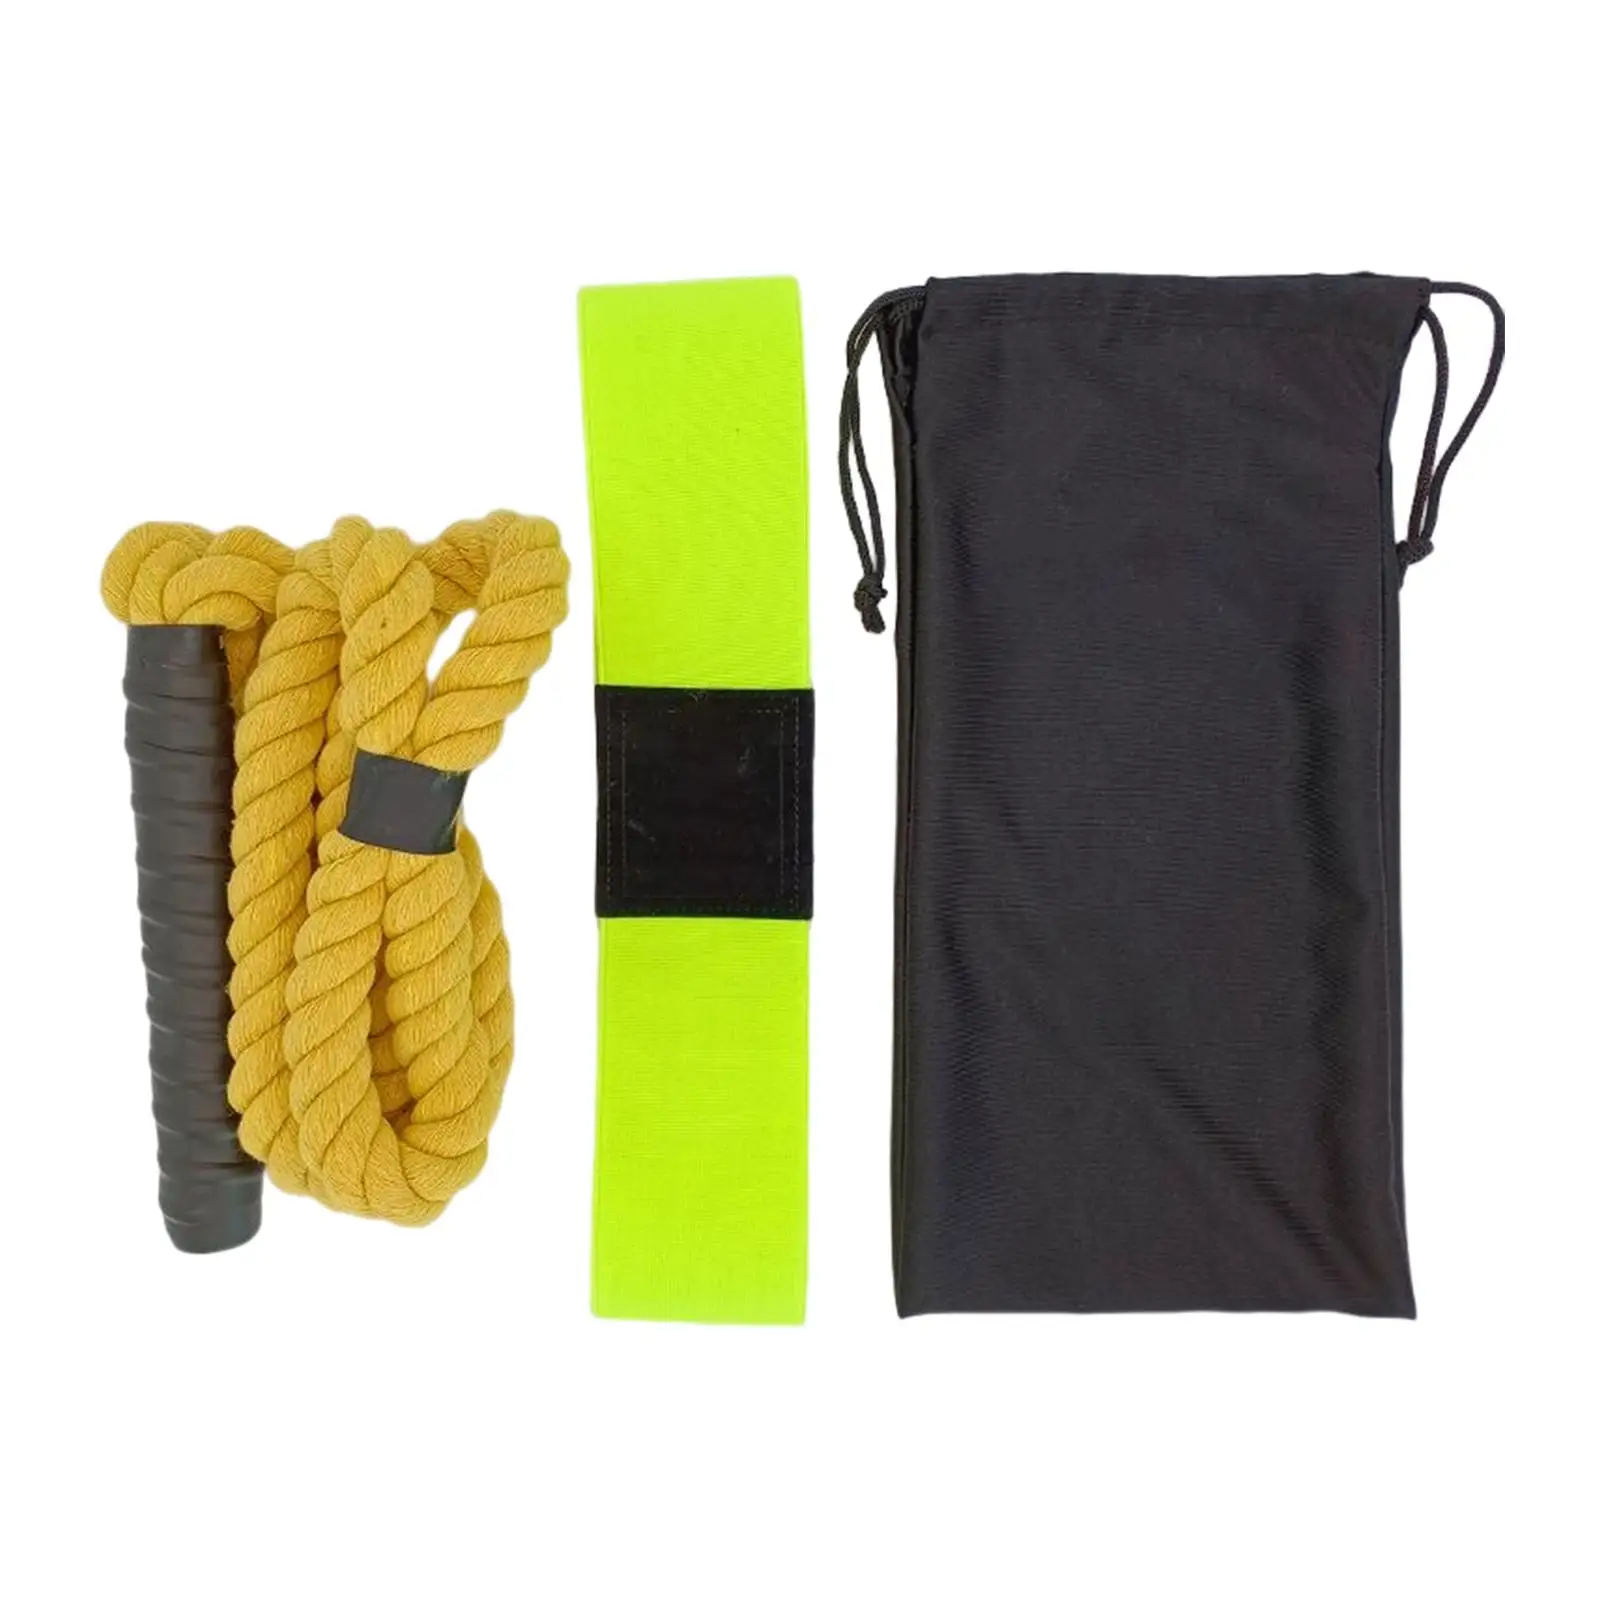 Golf Swing Trainer Aid Swing Correcting Arm Band for Improved Strength Speed Balance Rhythm